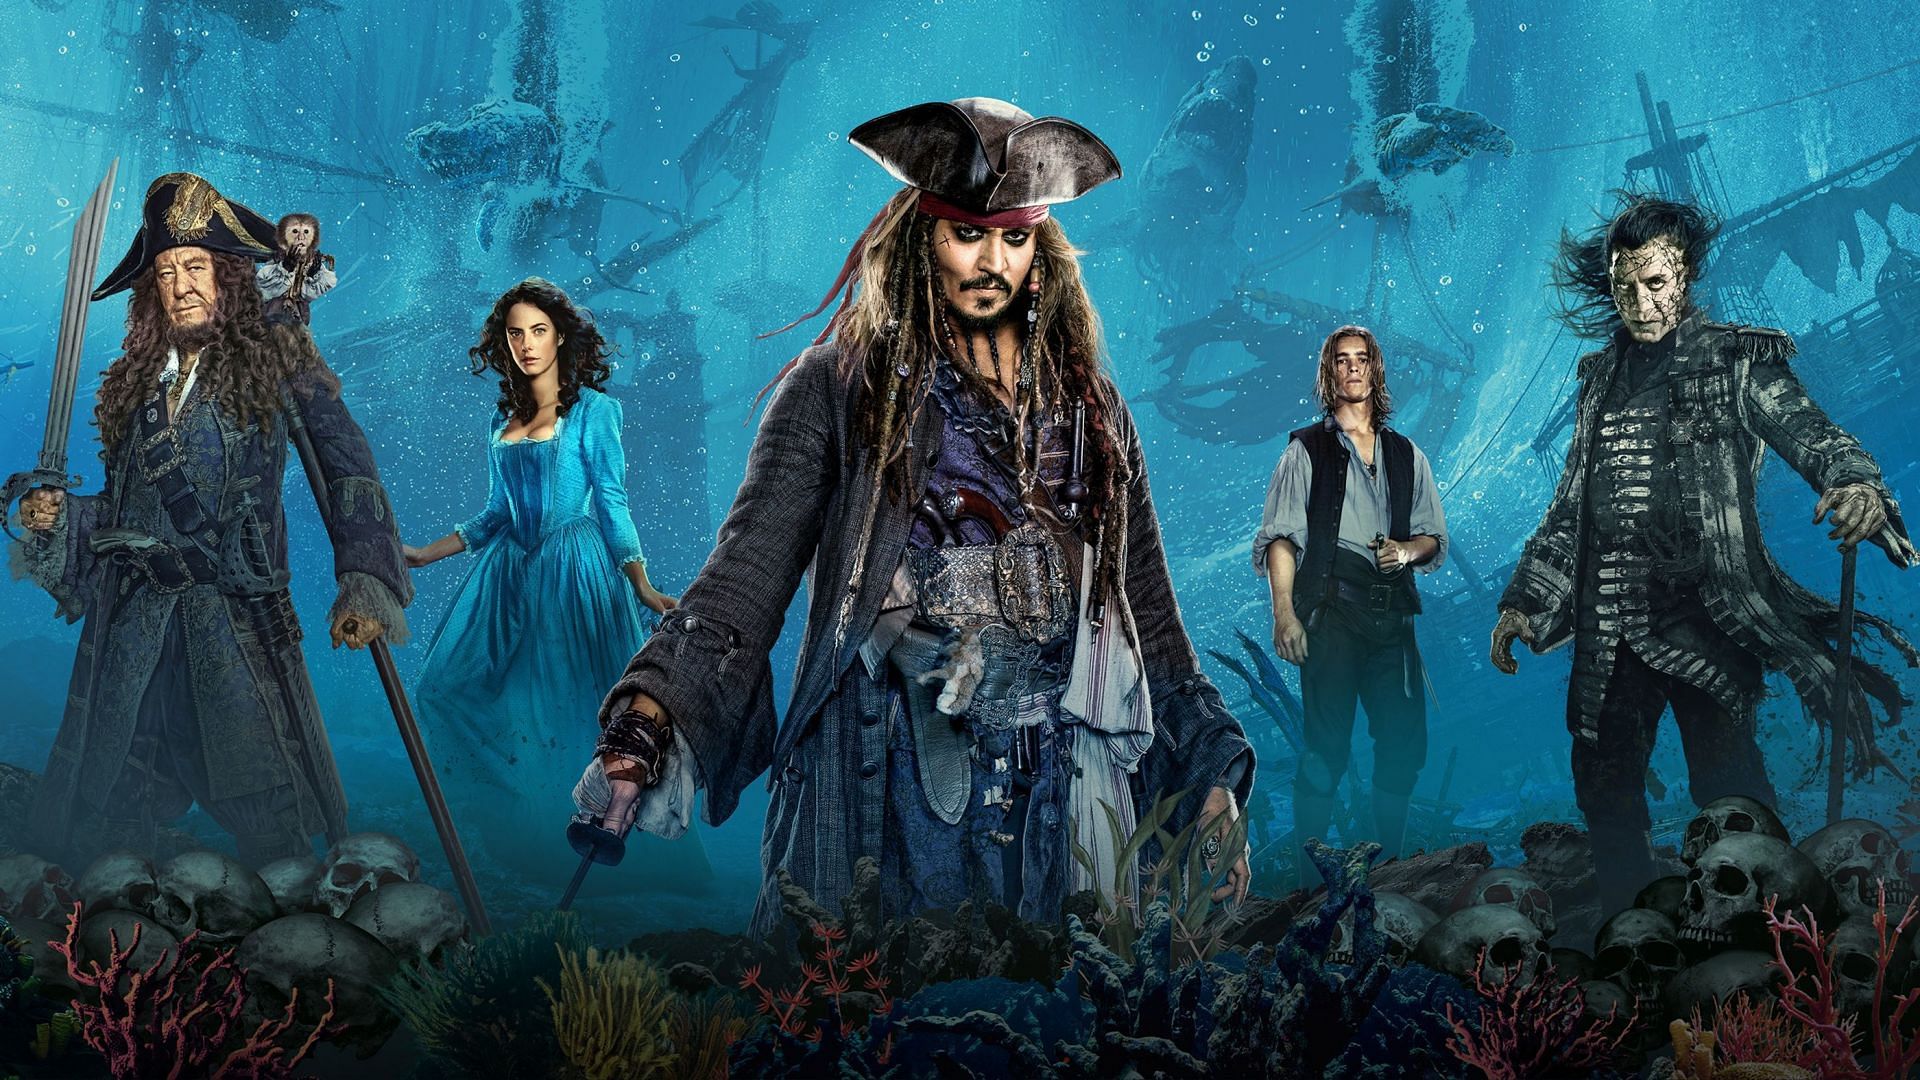 Will Johnny Depp reprise his role in Pirates of the Caribbean 6? (Image via Disney)